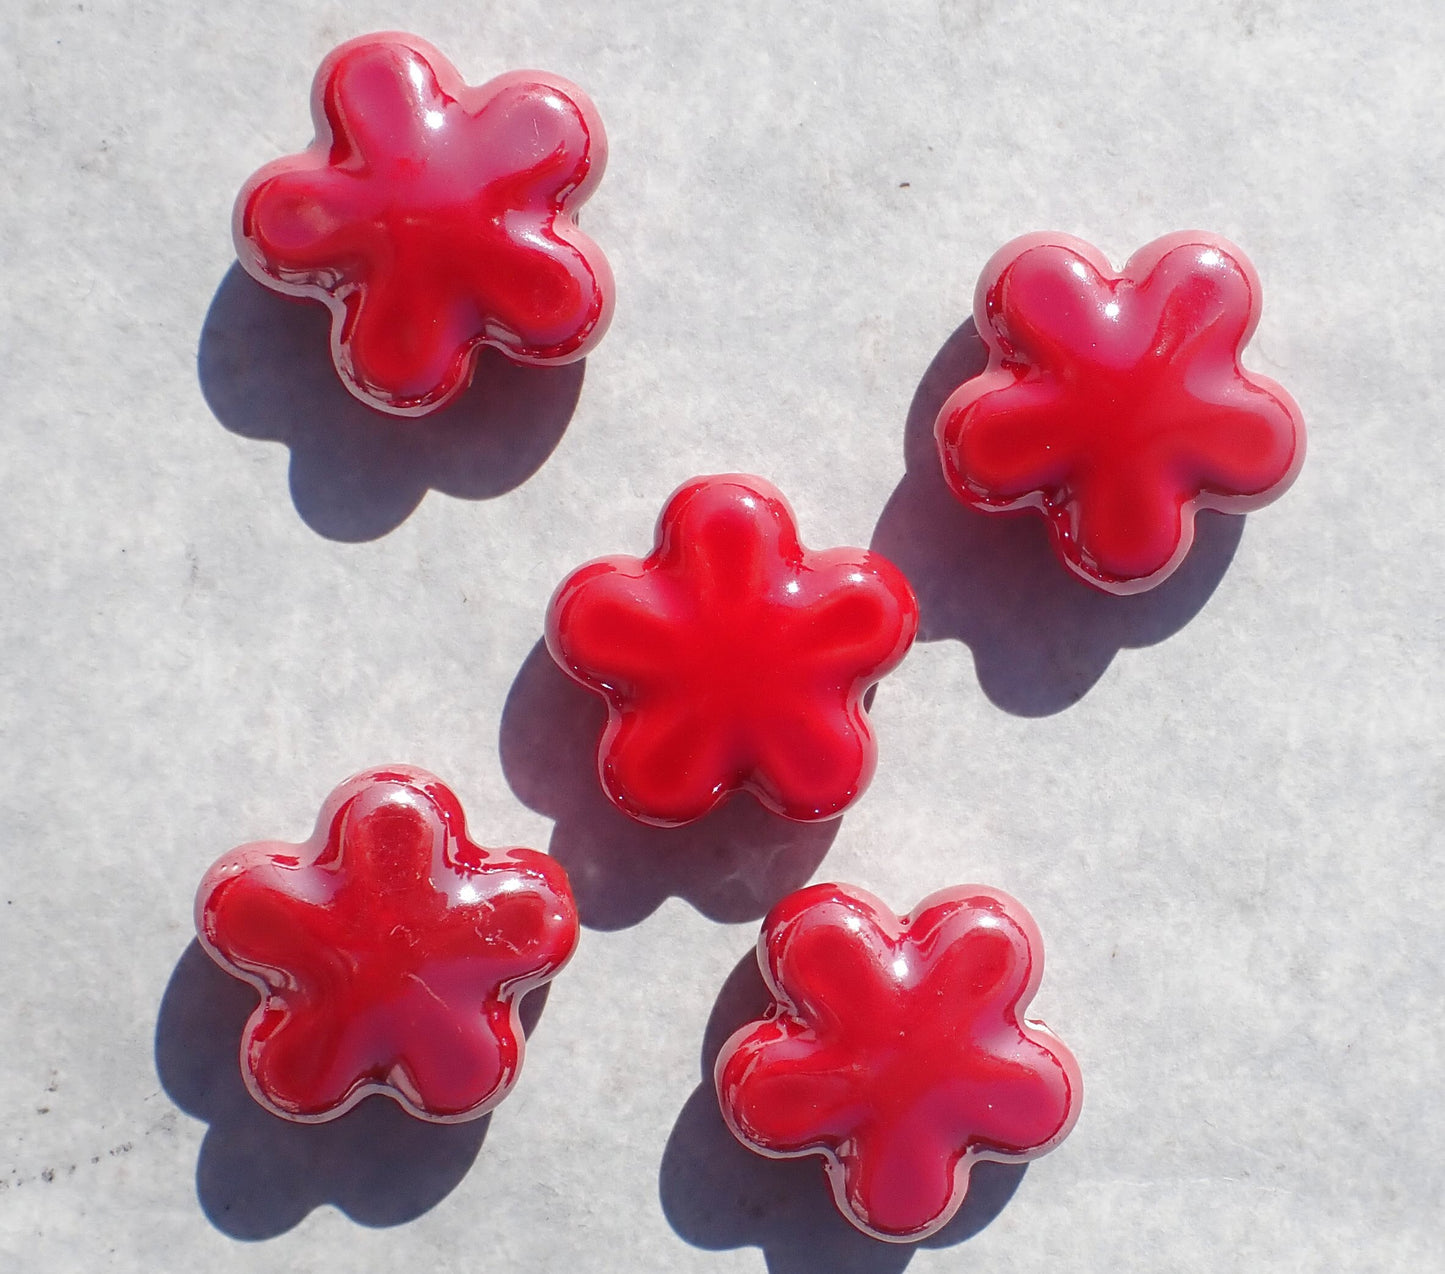 Red Flower Beads - 18mm Ceramic Mosaic Tiles - Five Petal Floral Jewelry Supplies